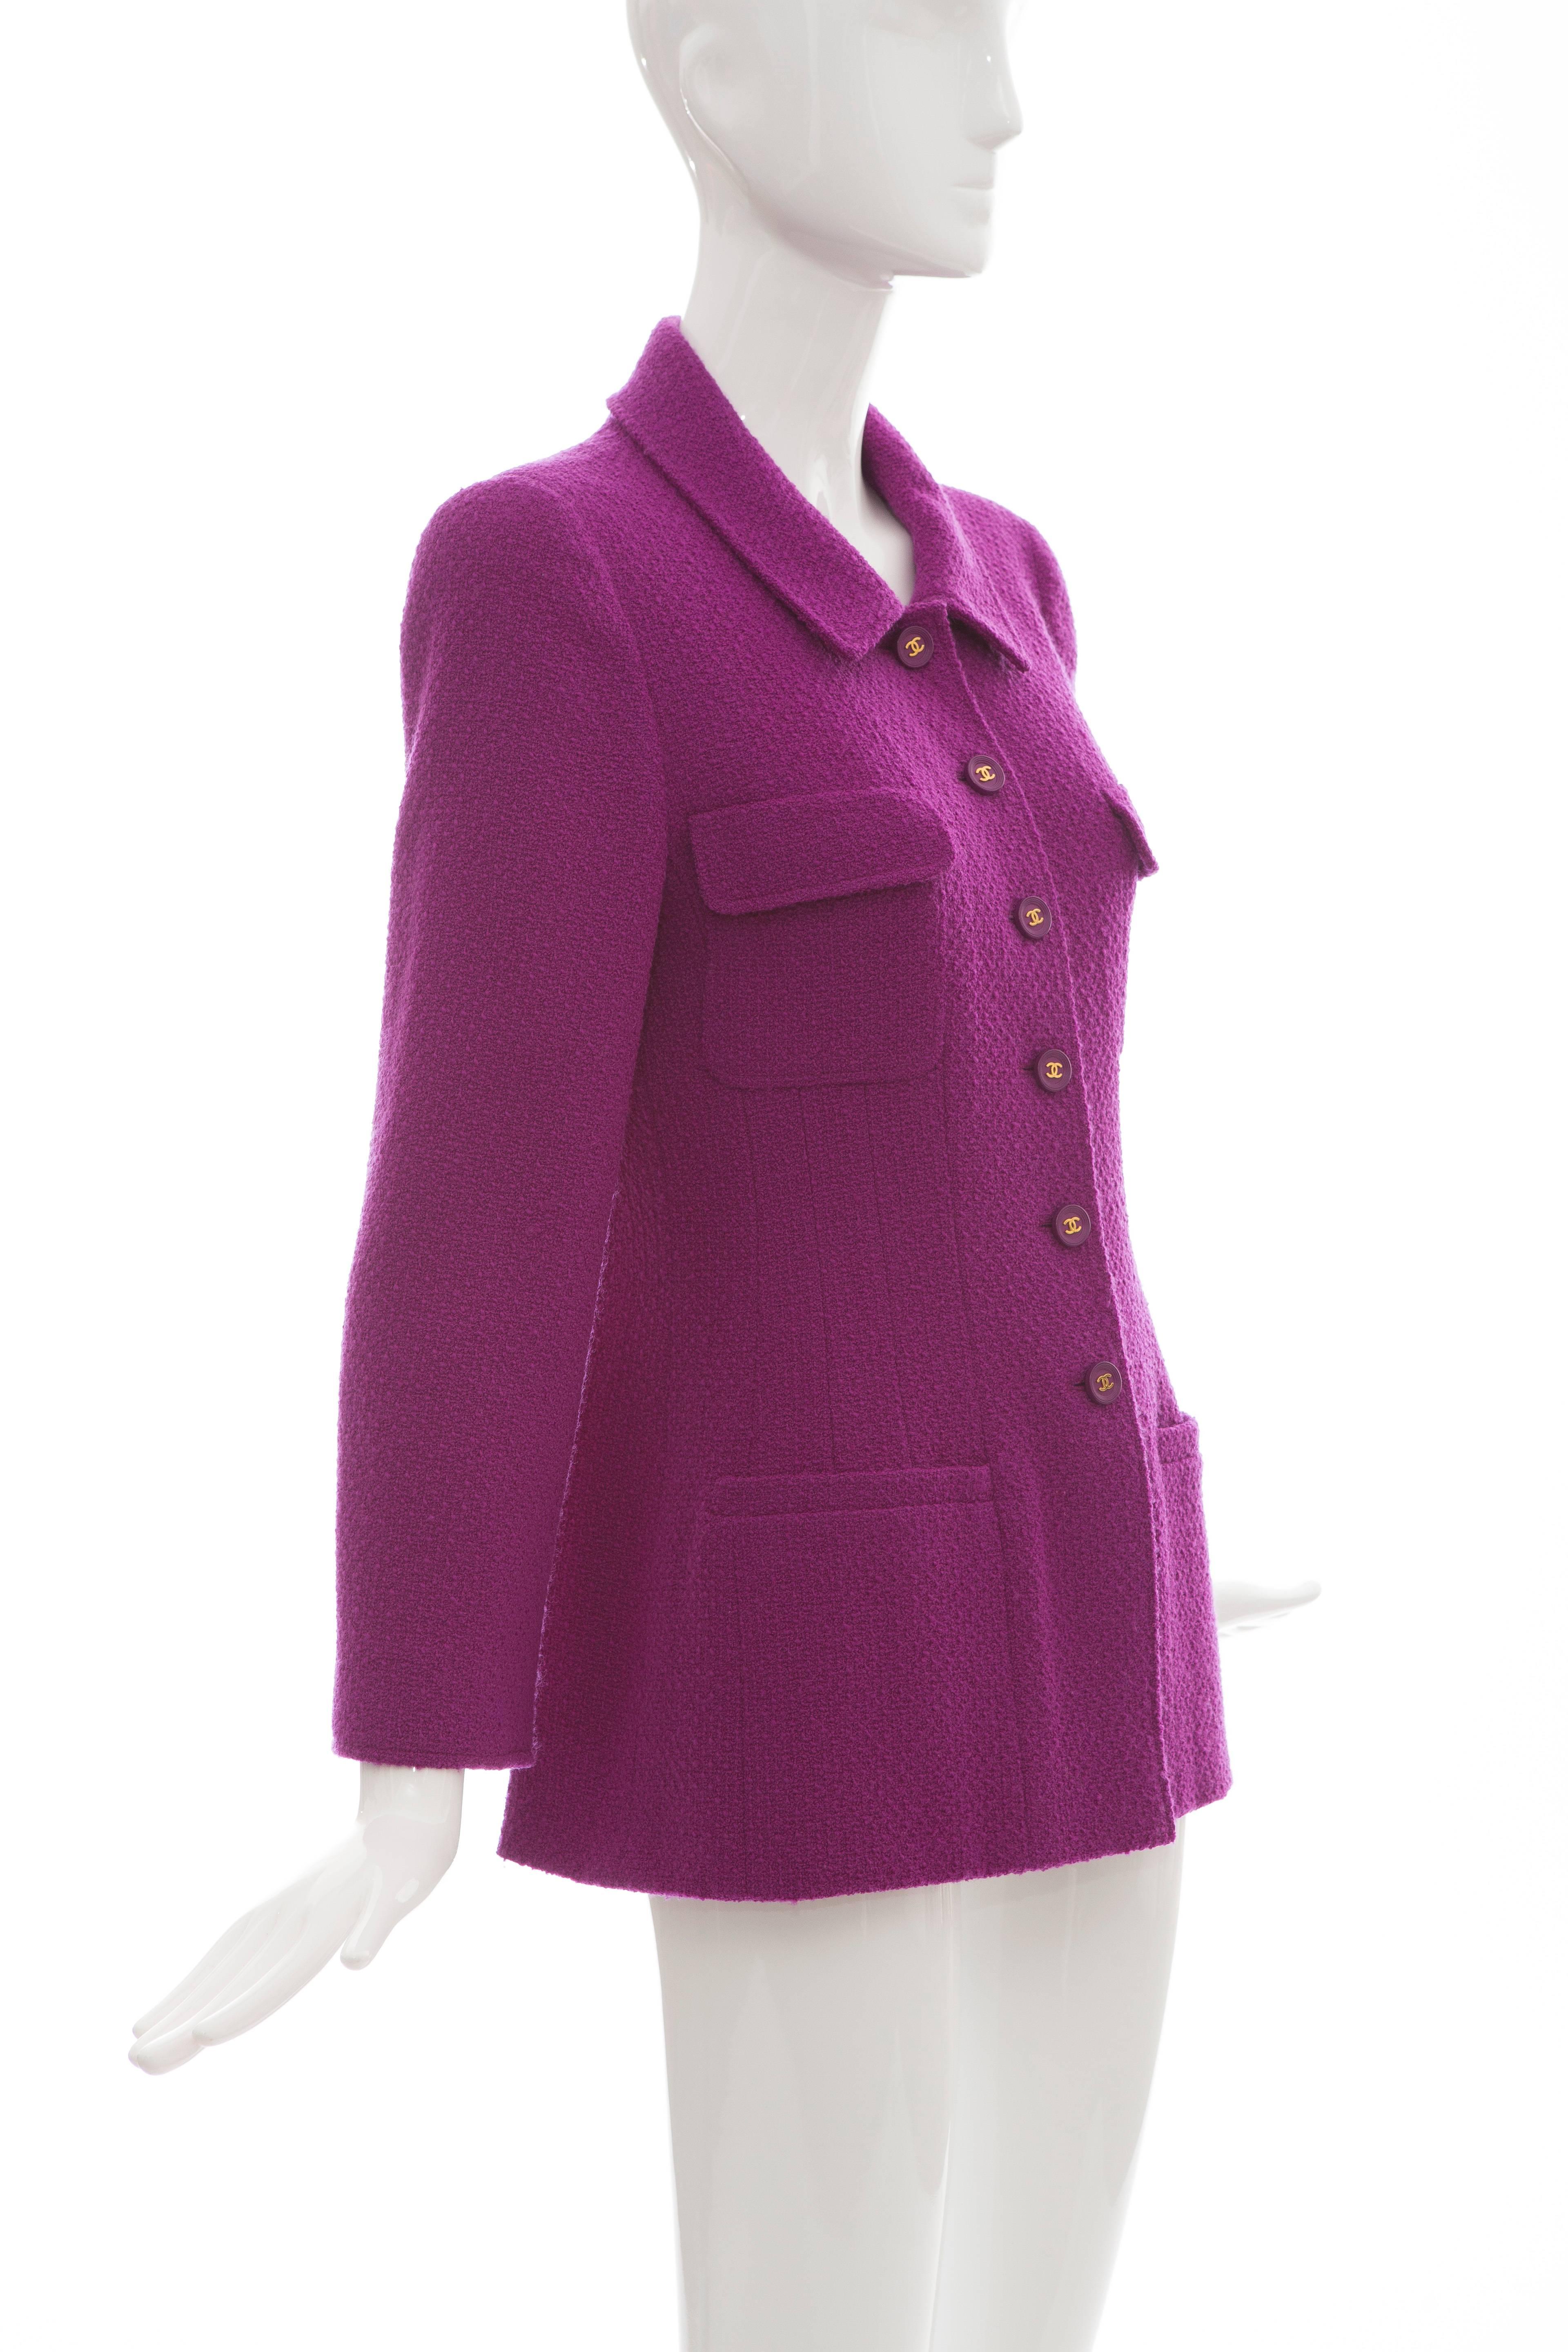 Chanel Violet Wool Crepe Button Front Jacket, Fall 1995 For Sale 1